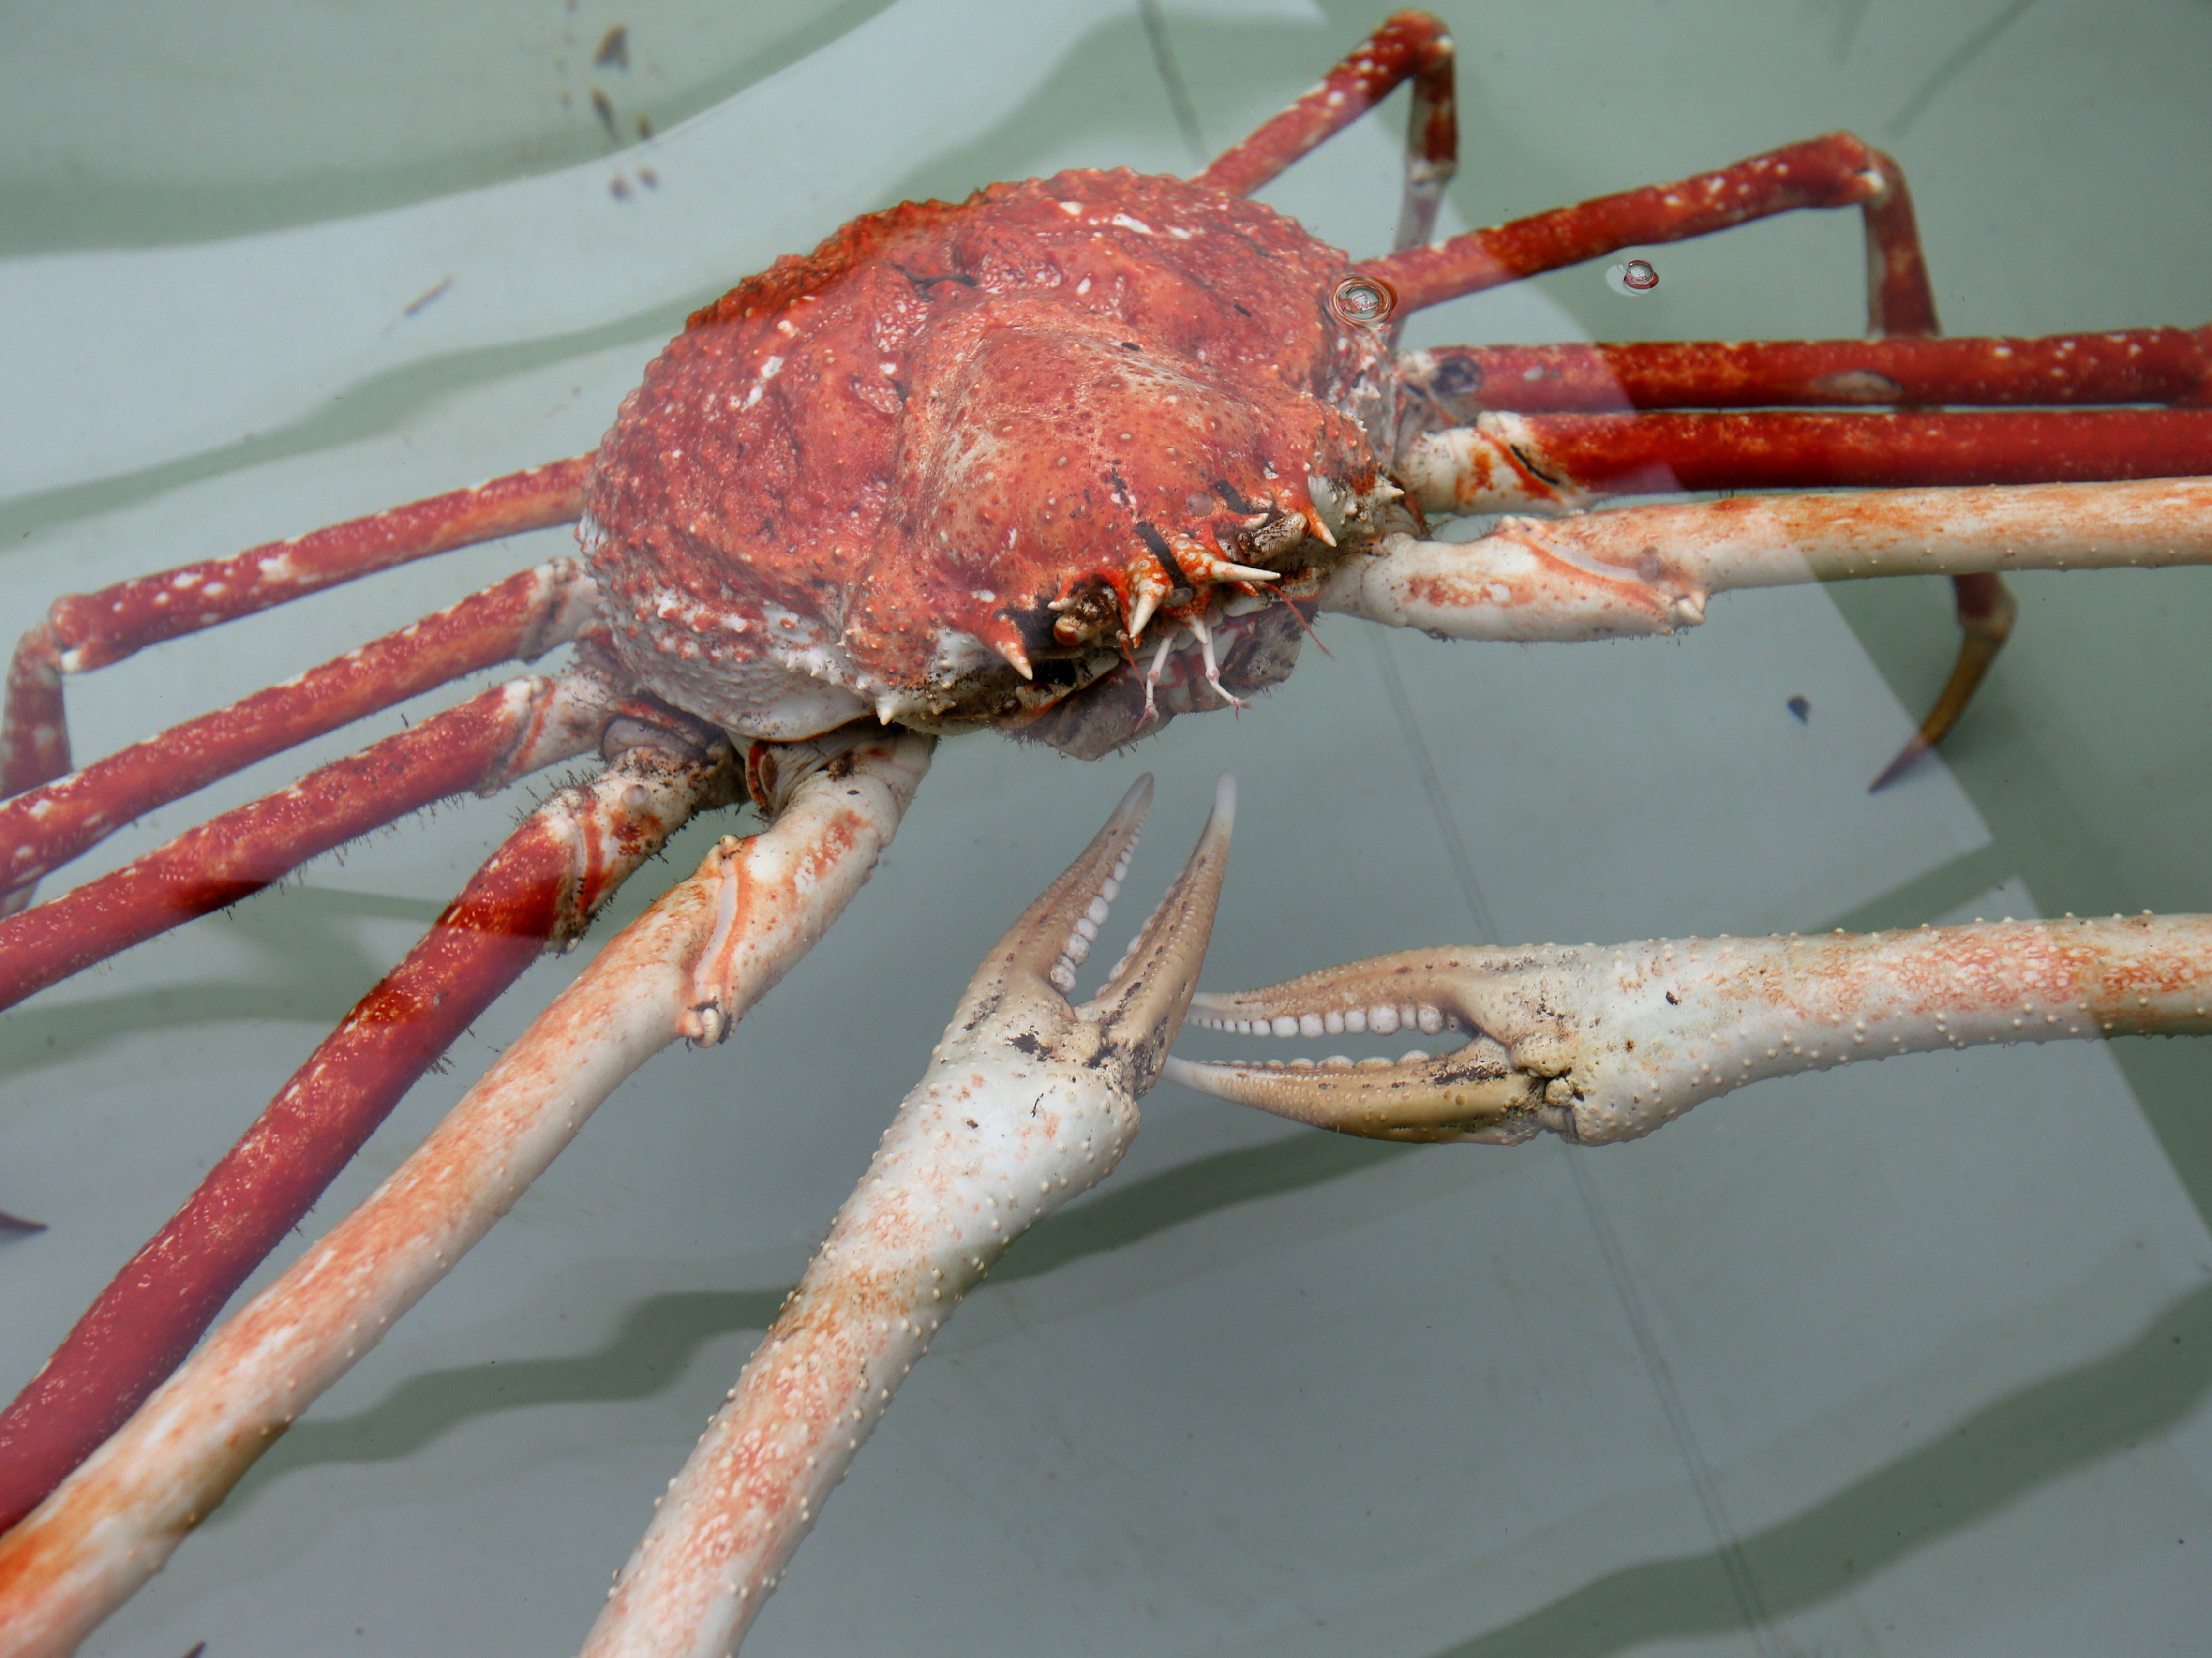 Spider crab will be given new name